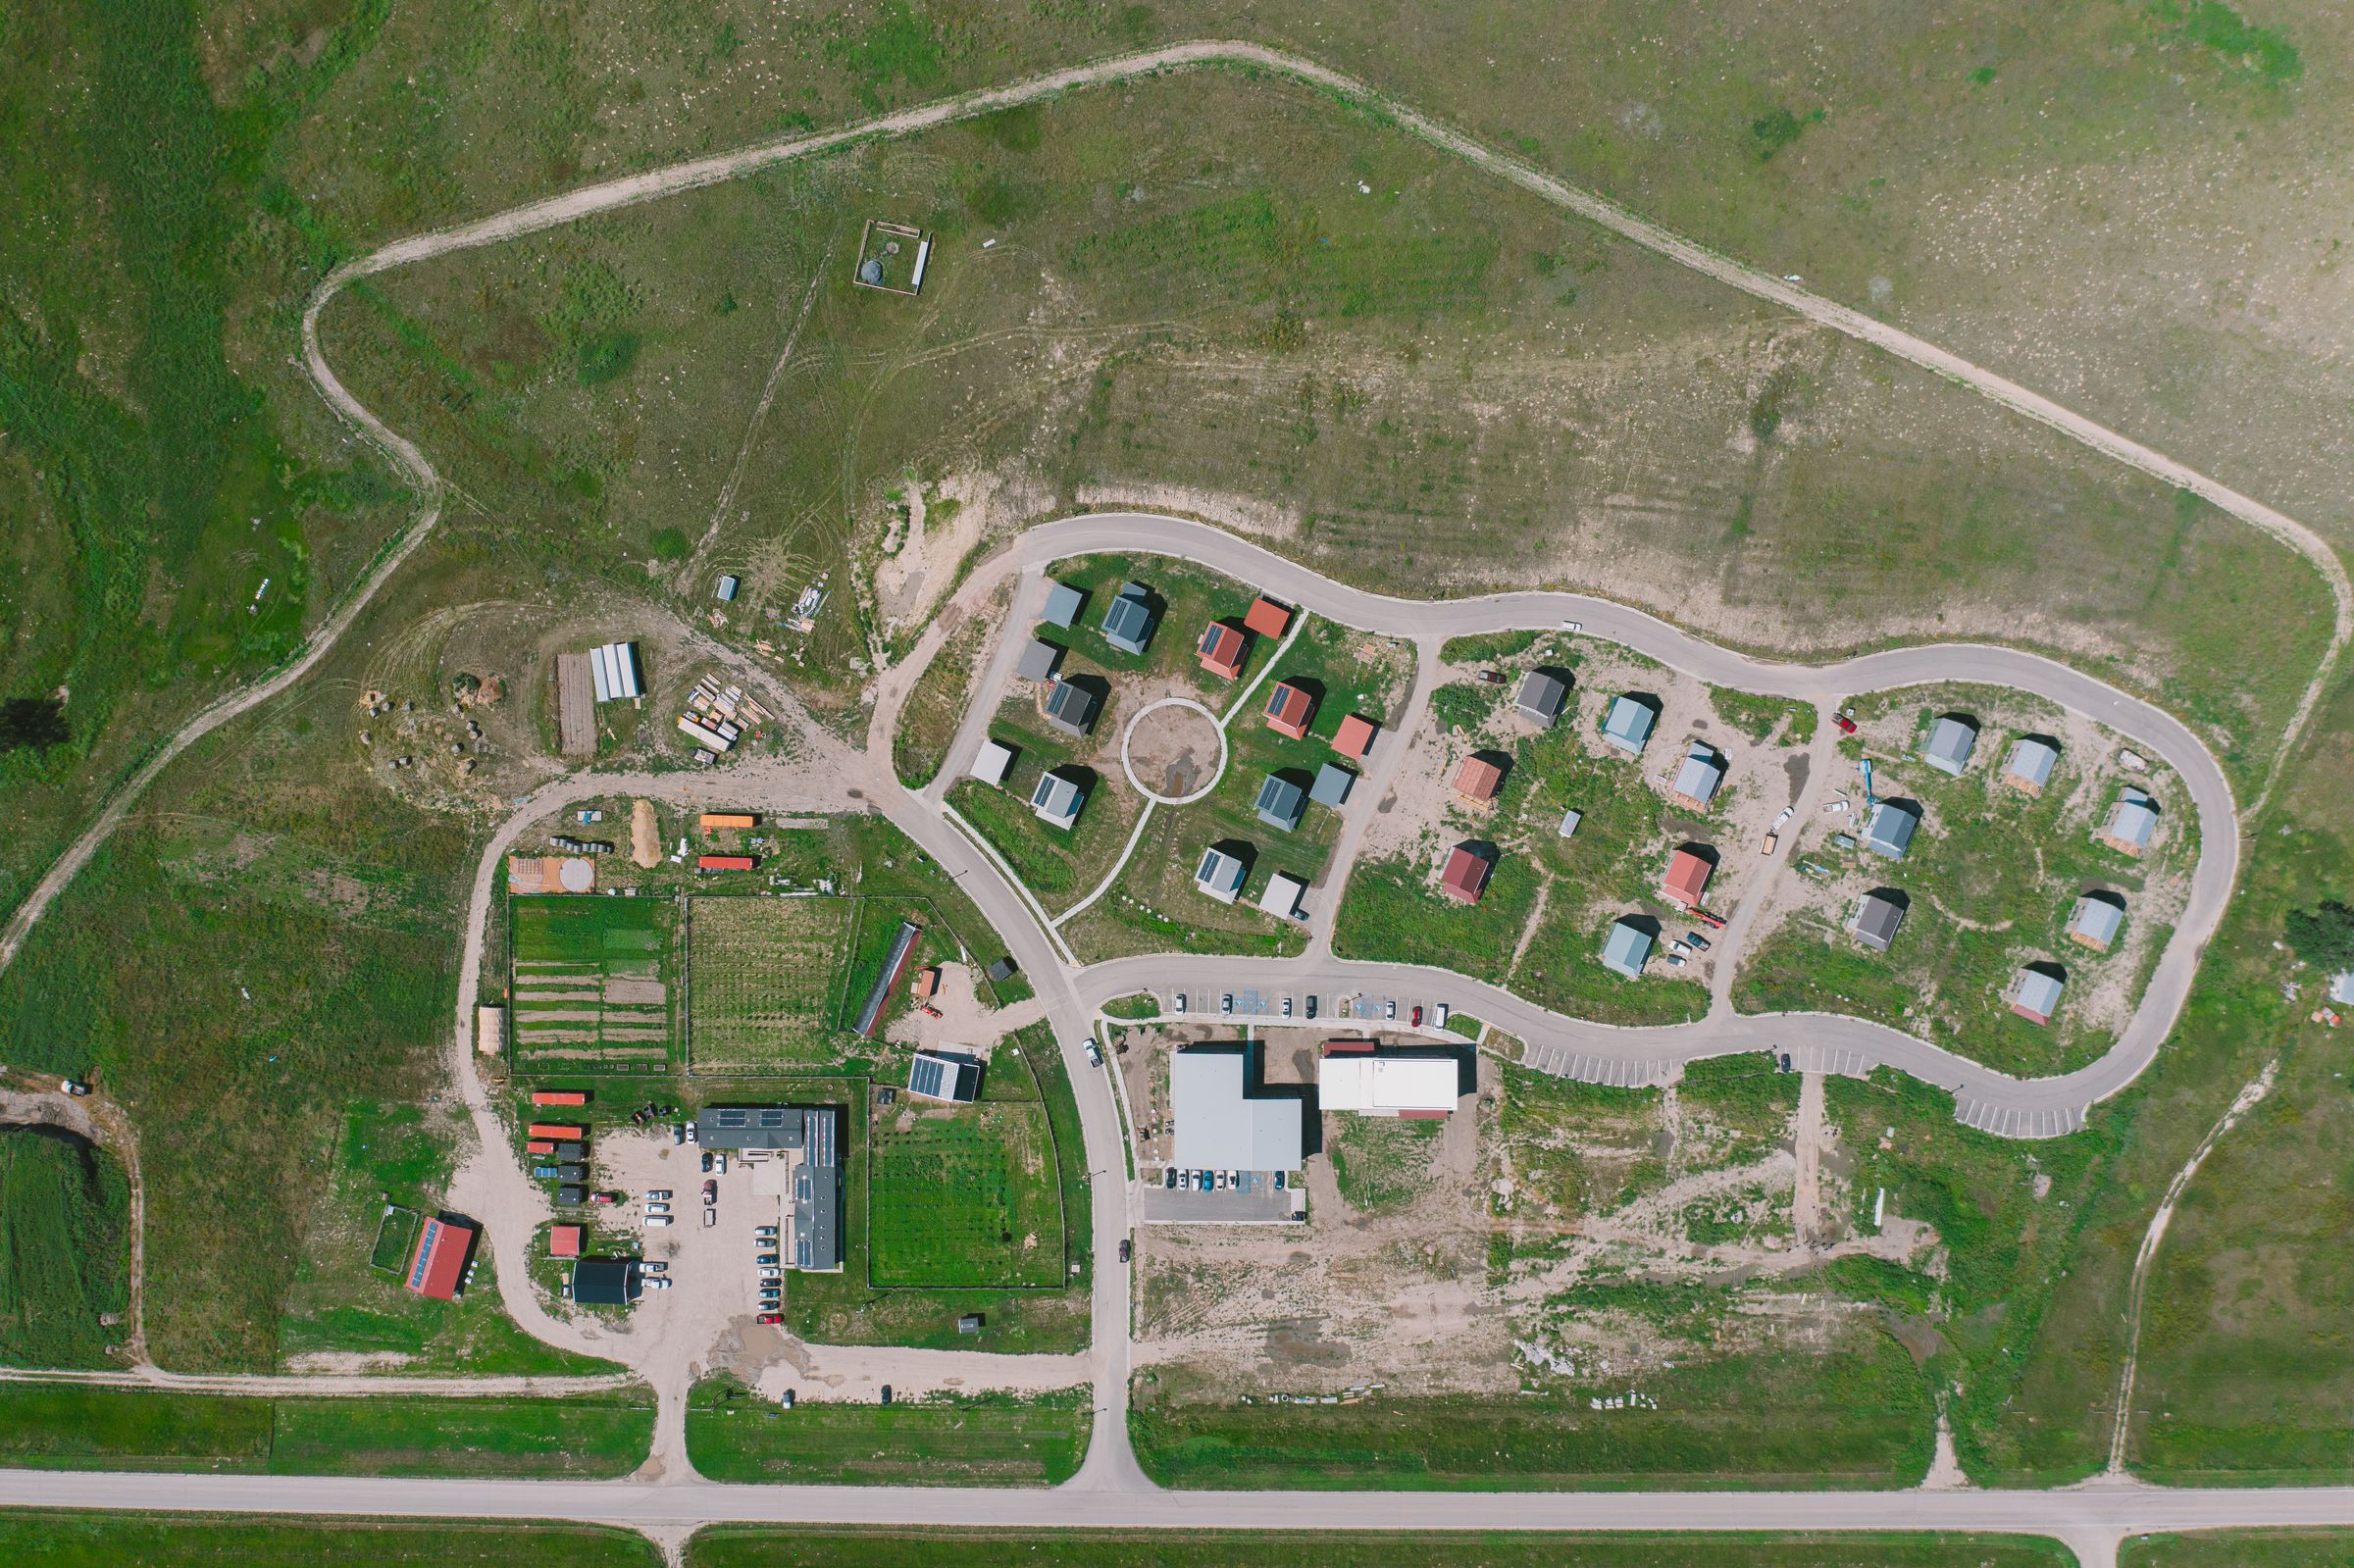 The Thunder Valley Community Development Corporation is developing a 34-acre “regenerative community” on the Pine Ridge Reservation in South Dakota.